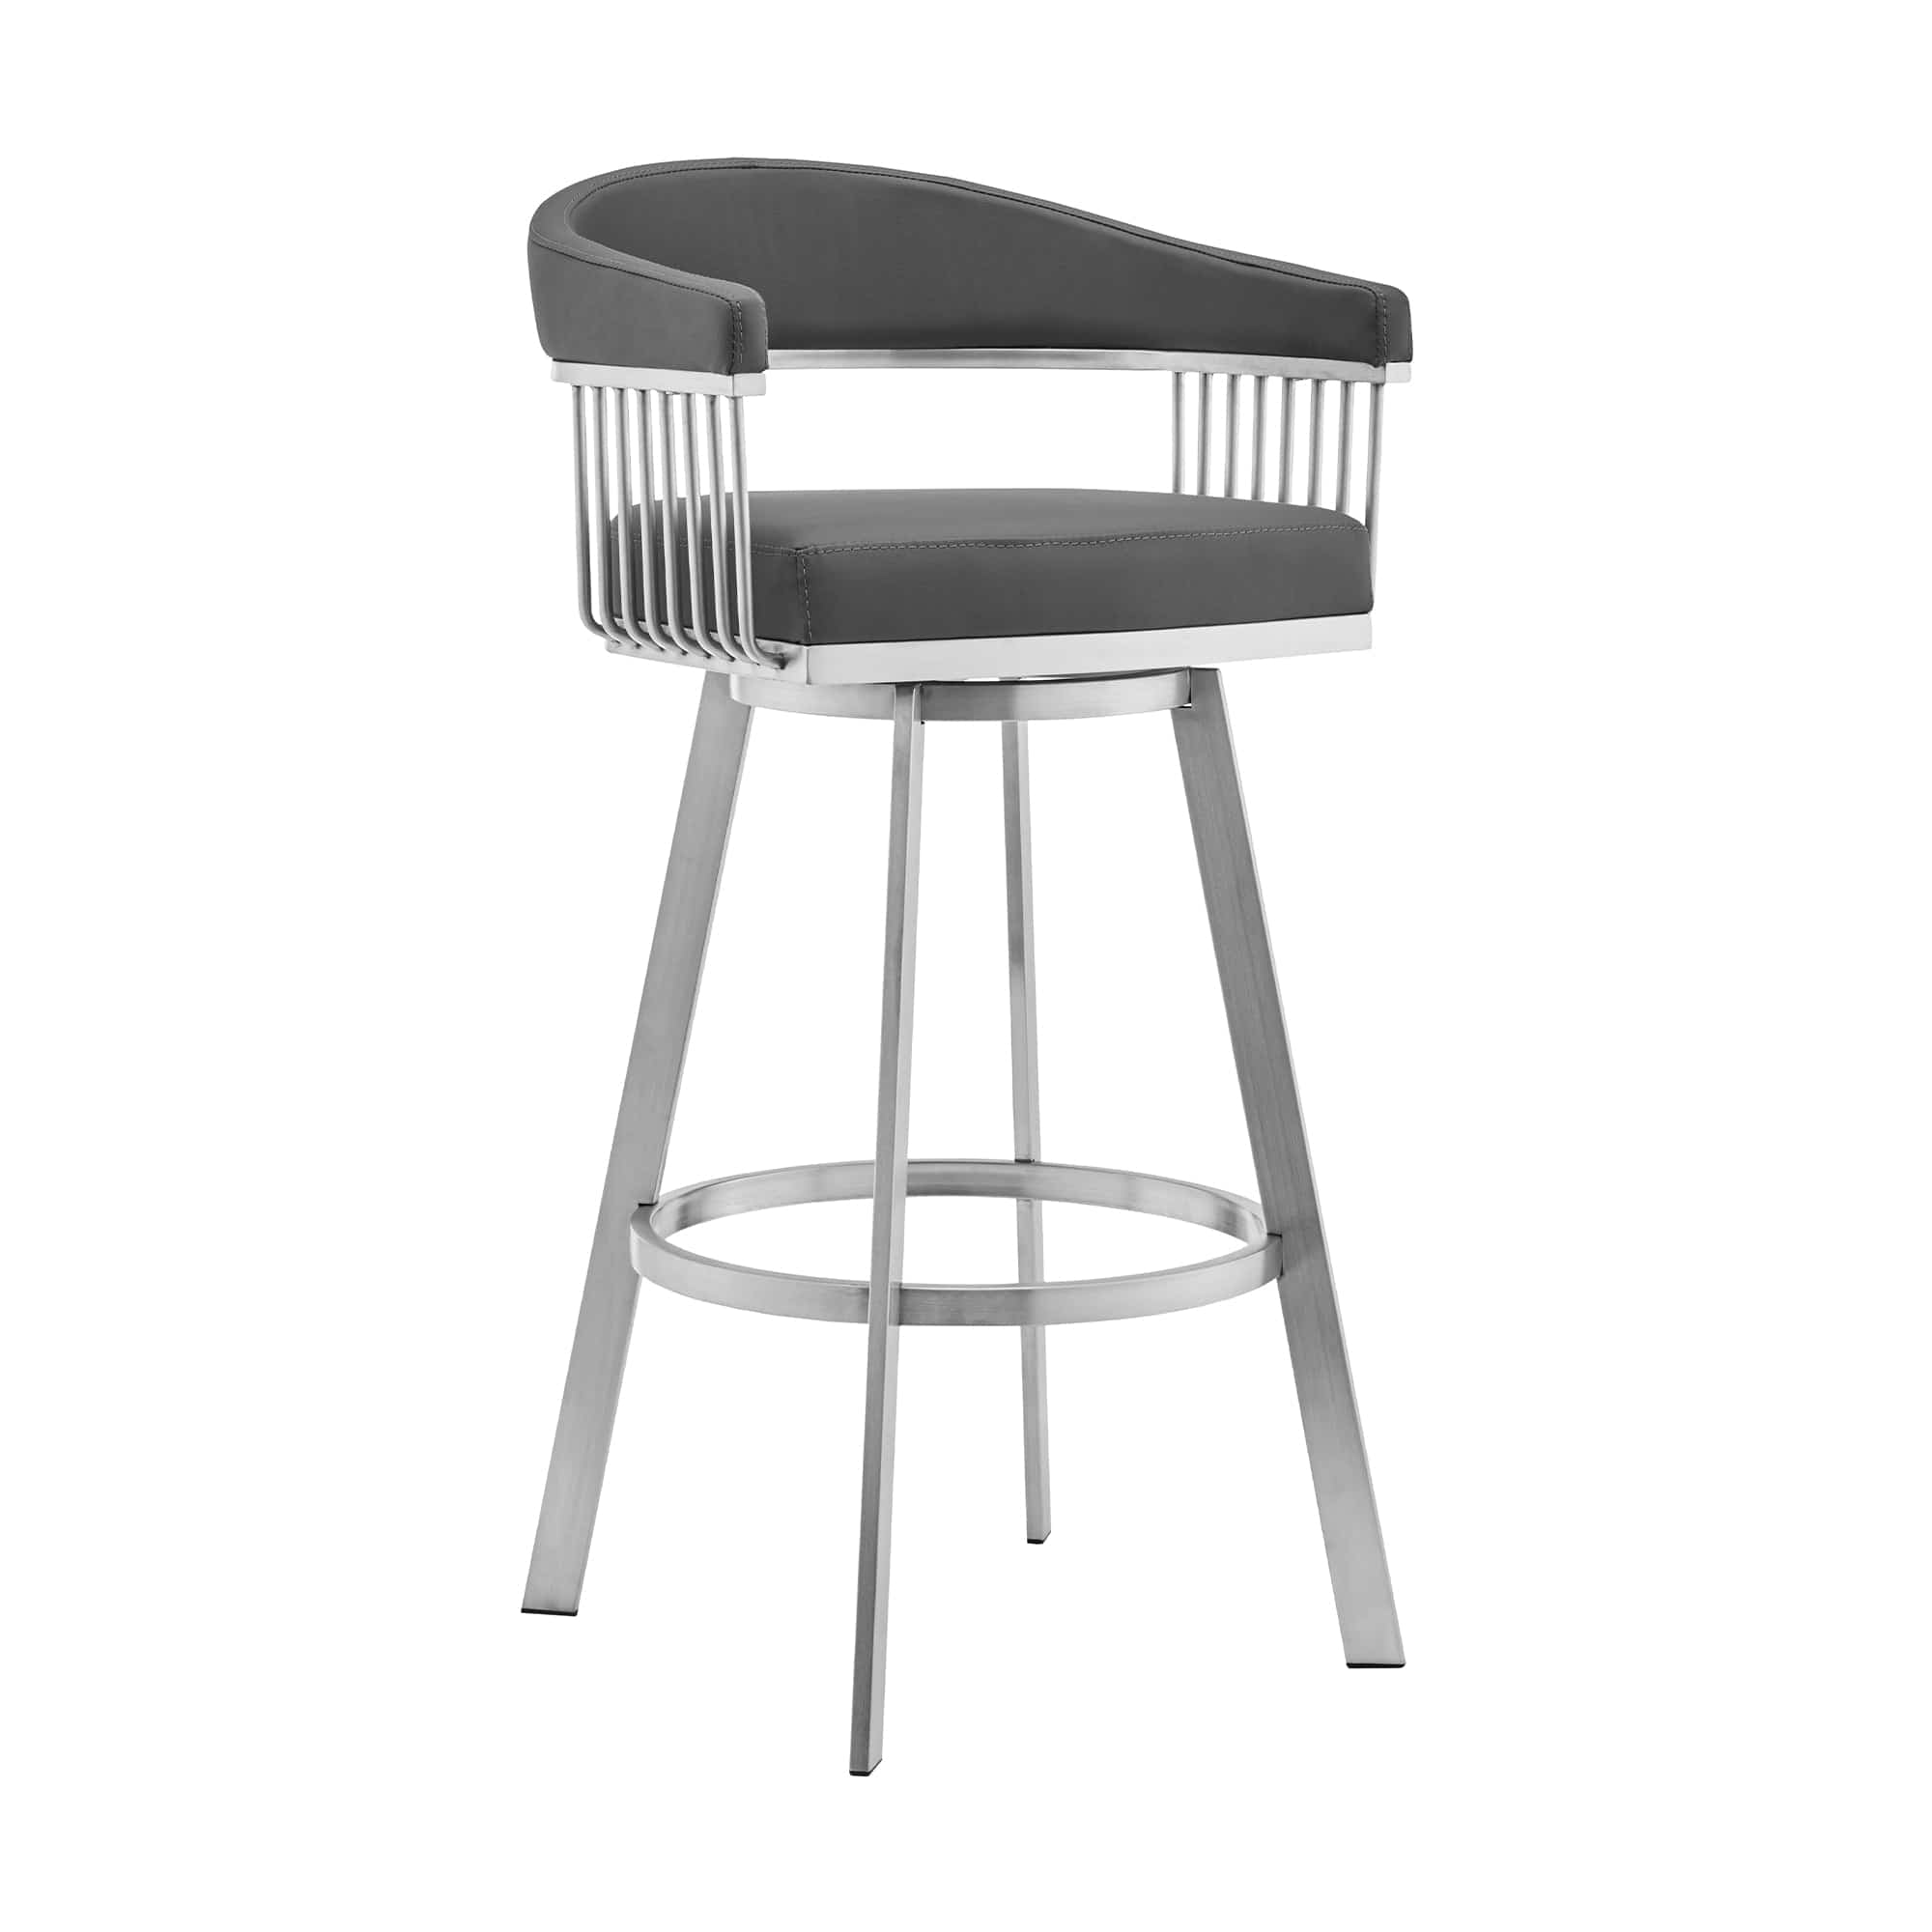 Armen Living Barstool Gray Faux Leather and Brushed Stainless Steel Swivel Bar Stool Armen Living - Chelsea 30" Bar Height Swivel Bar Stool in Silver finish and White Faux Leather | LCCSBASLWH30